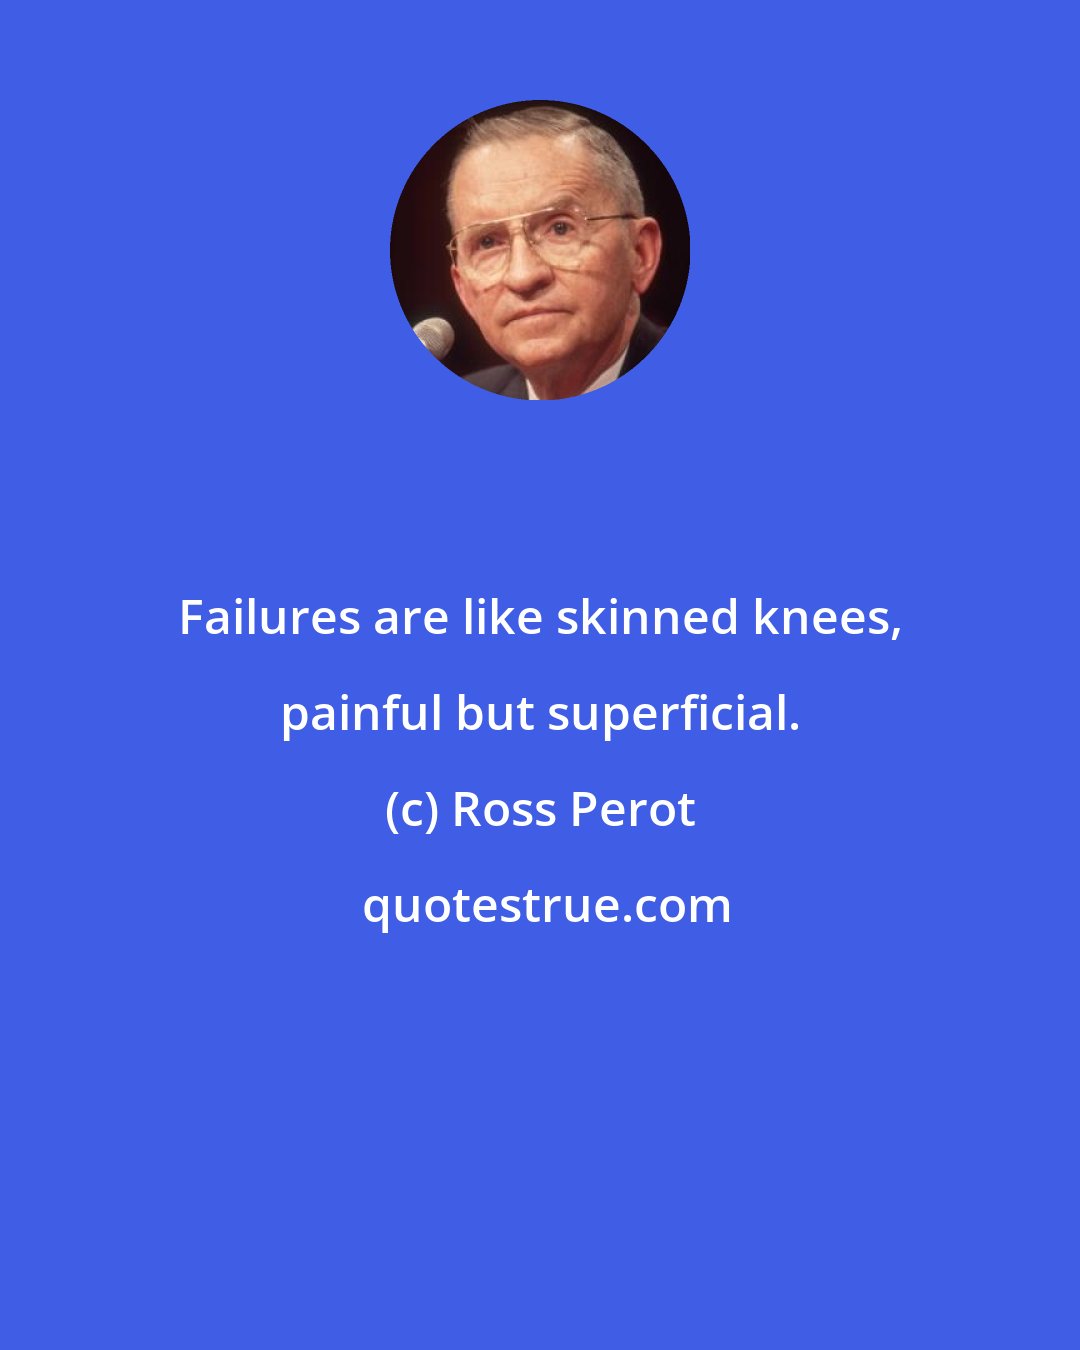 Ross Perot: Failures are like skinned knees, painful but superficial.